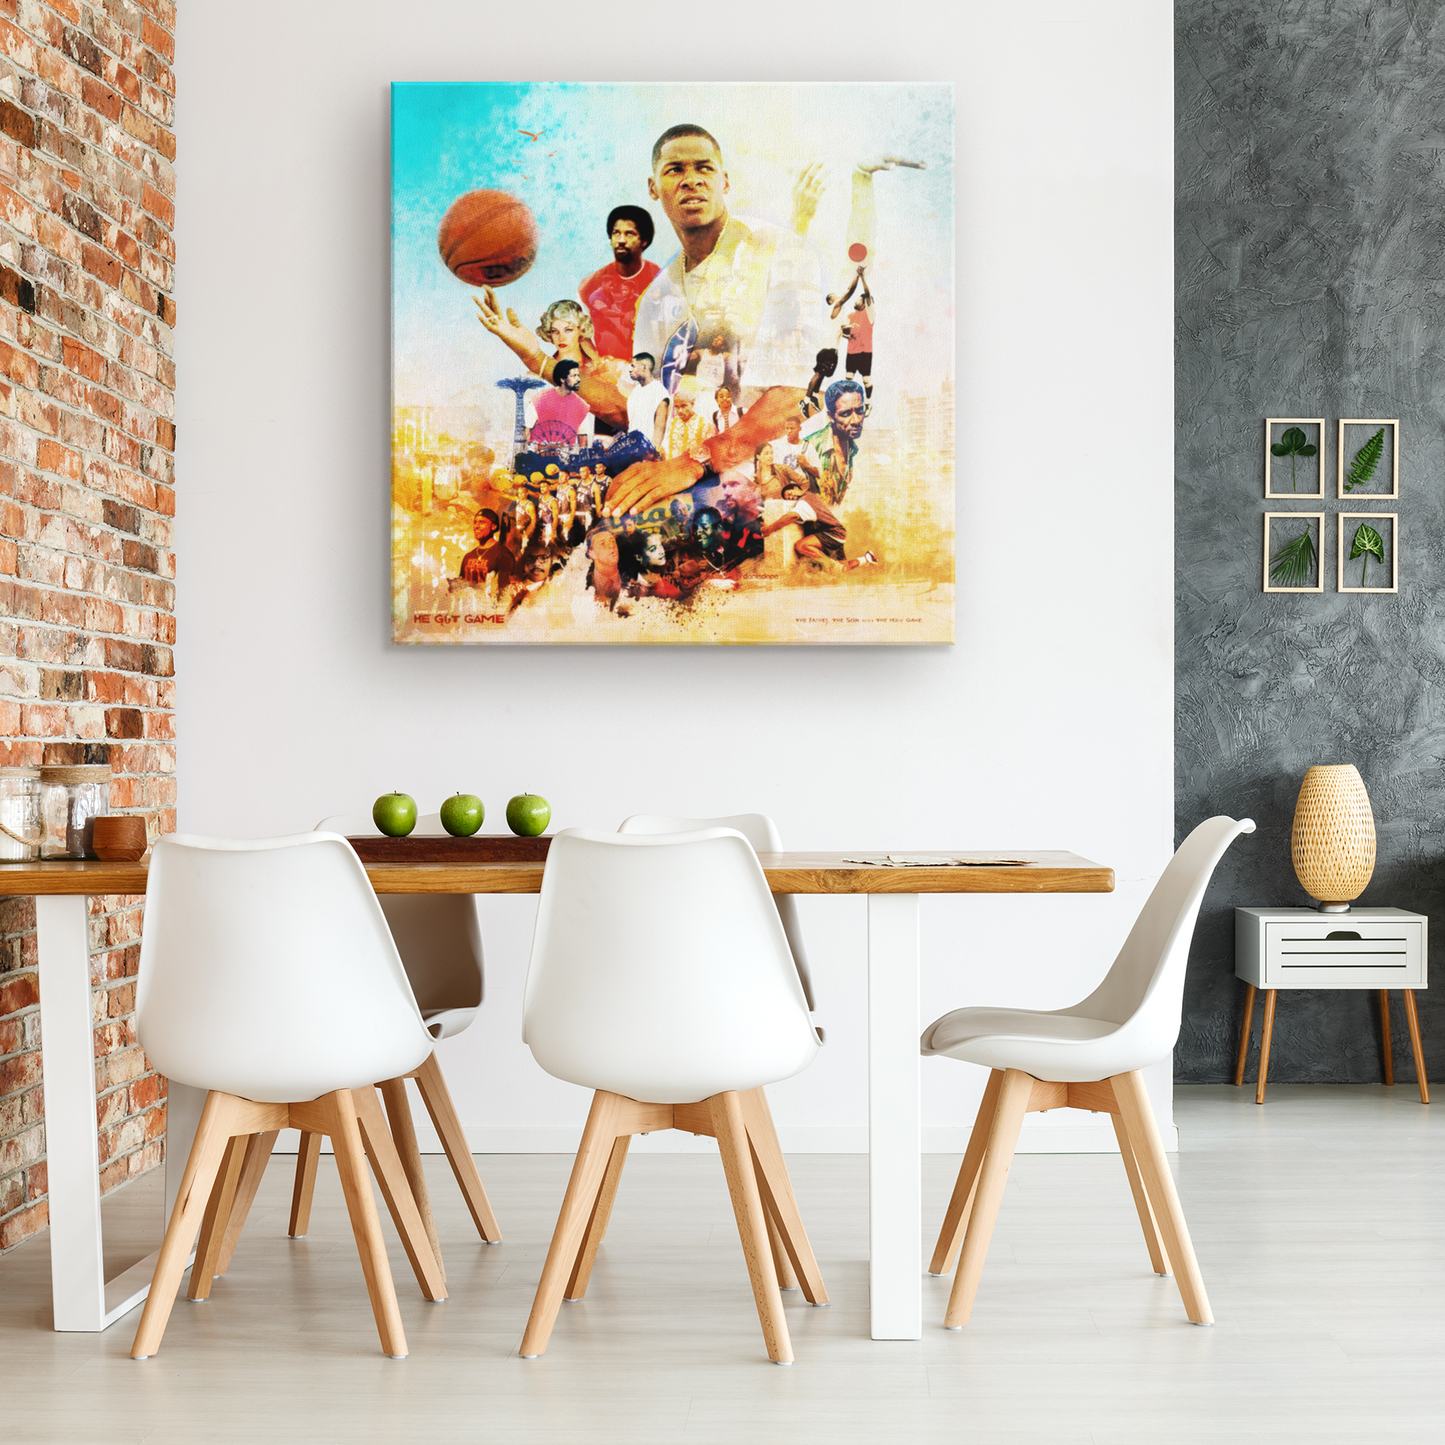 He Got Game Square Canvas